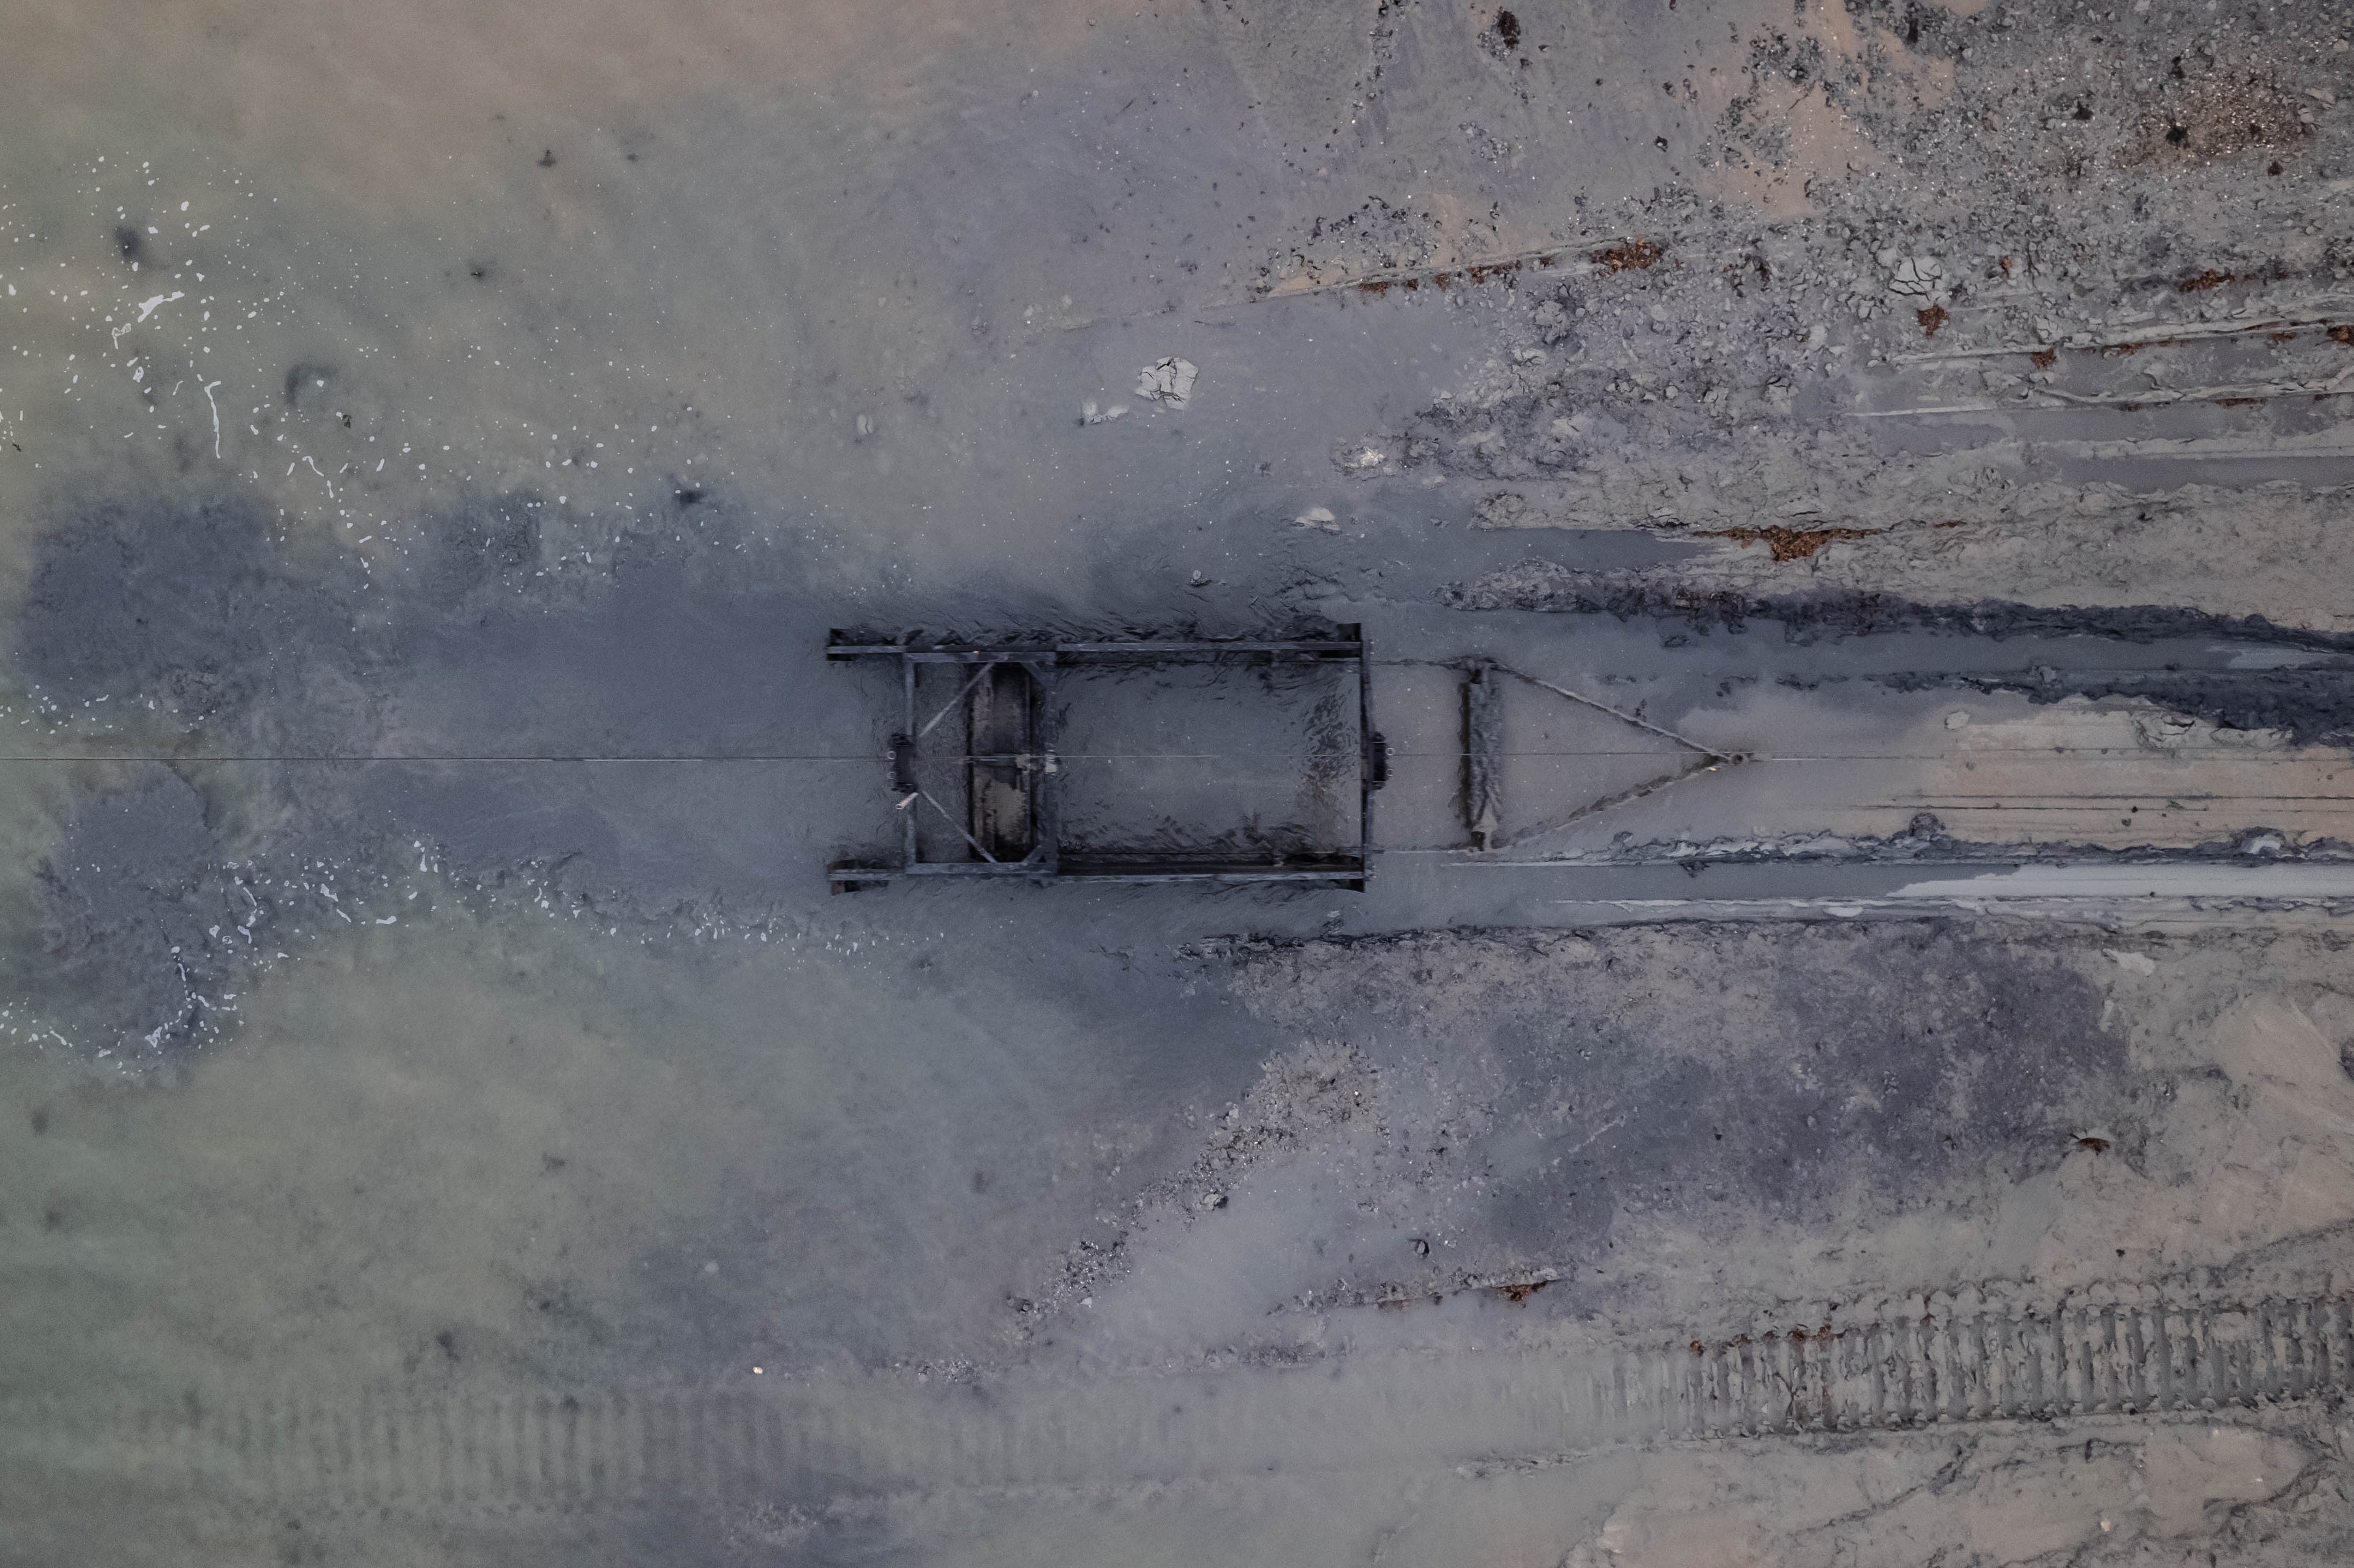 The dragbox shown from an aerial perspective, moving dredged sediment up to the foreshore